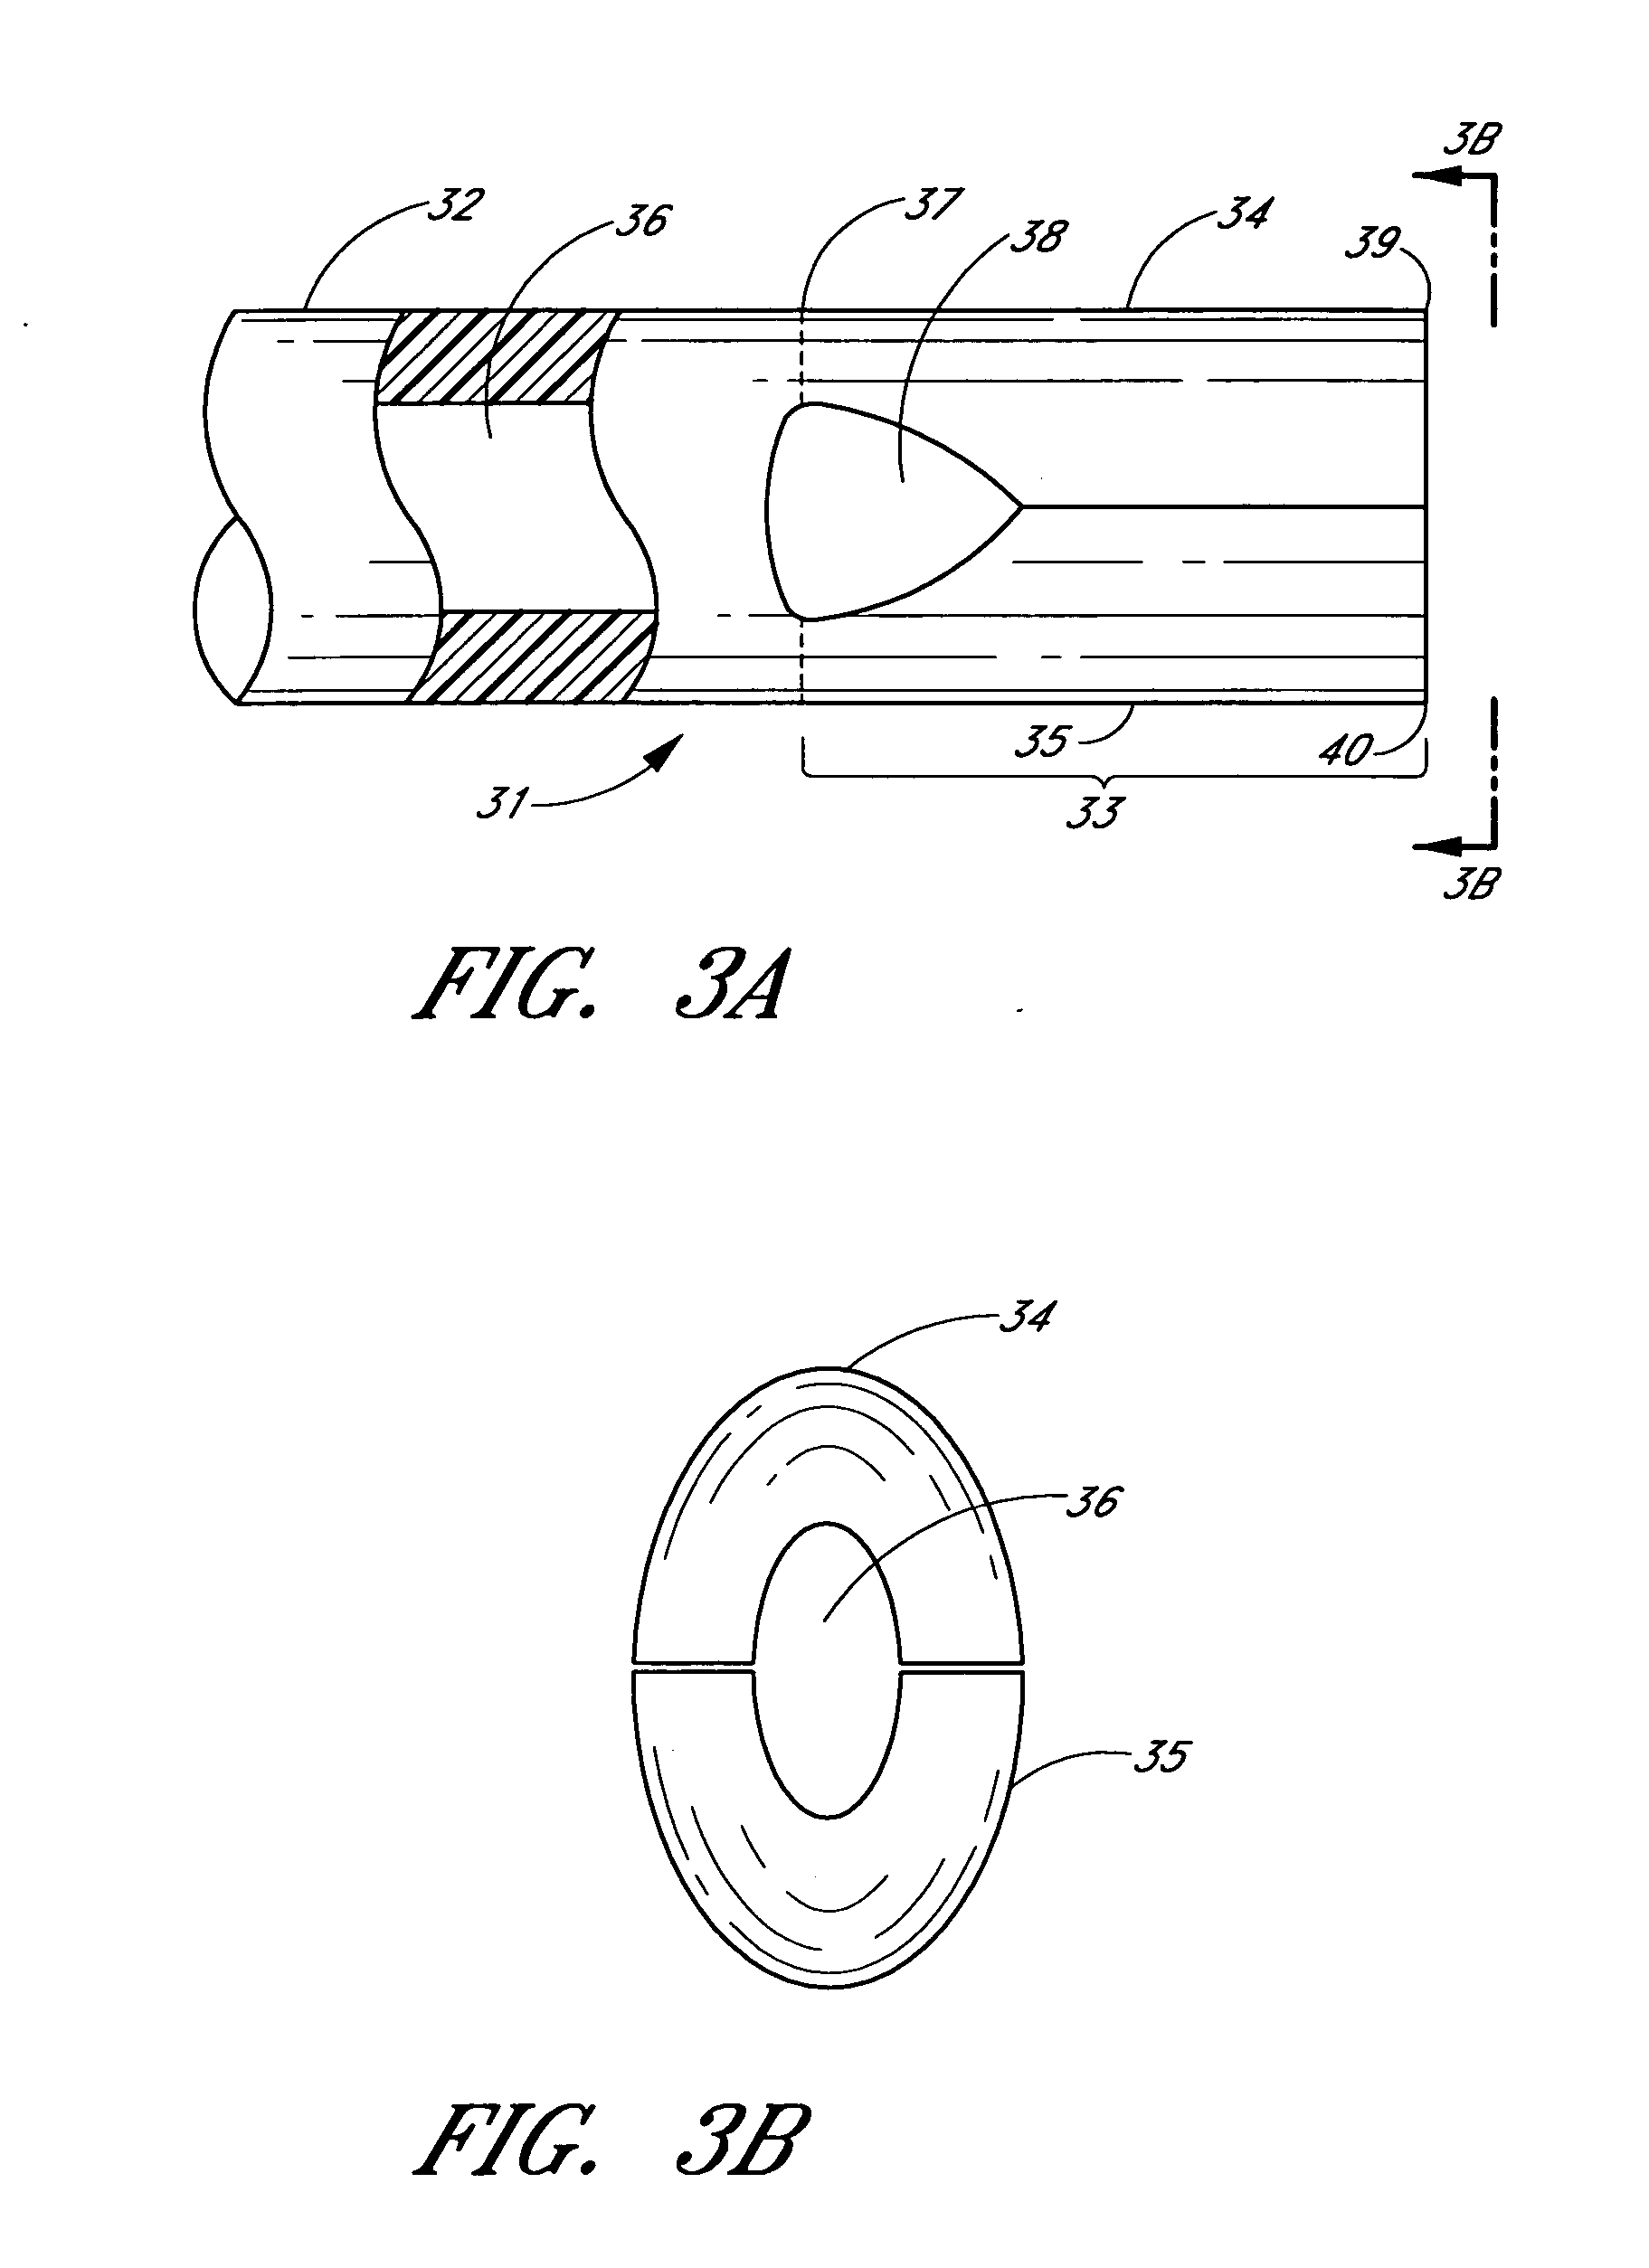 Implant with intraocular pressure sensor for glaucoma treatment